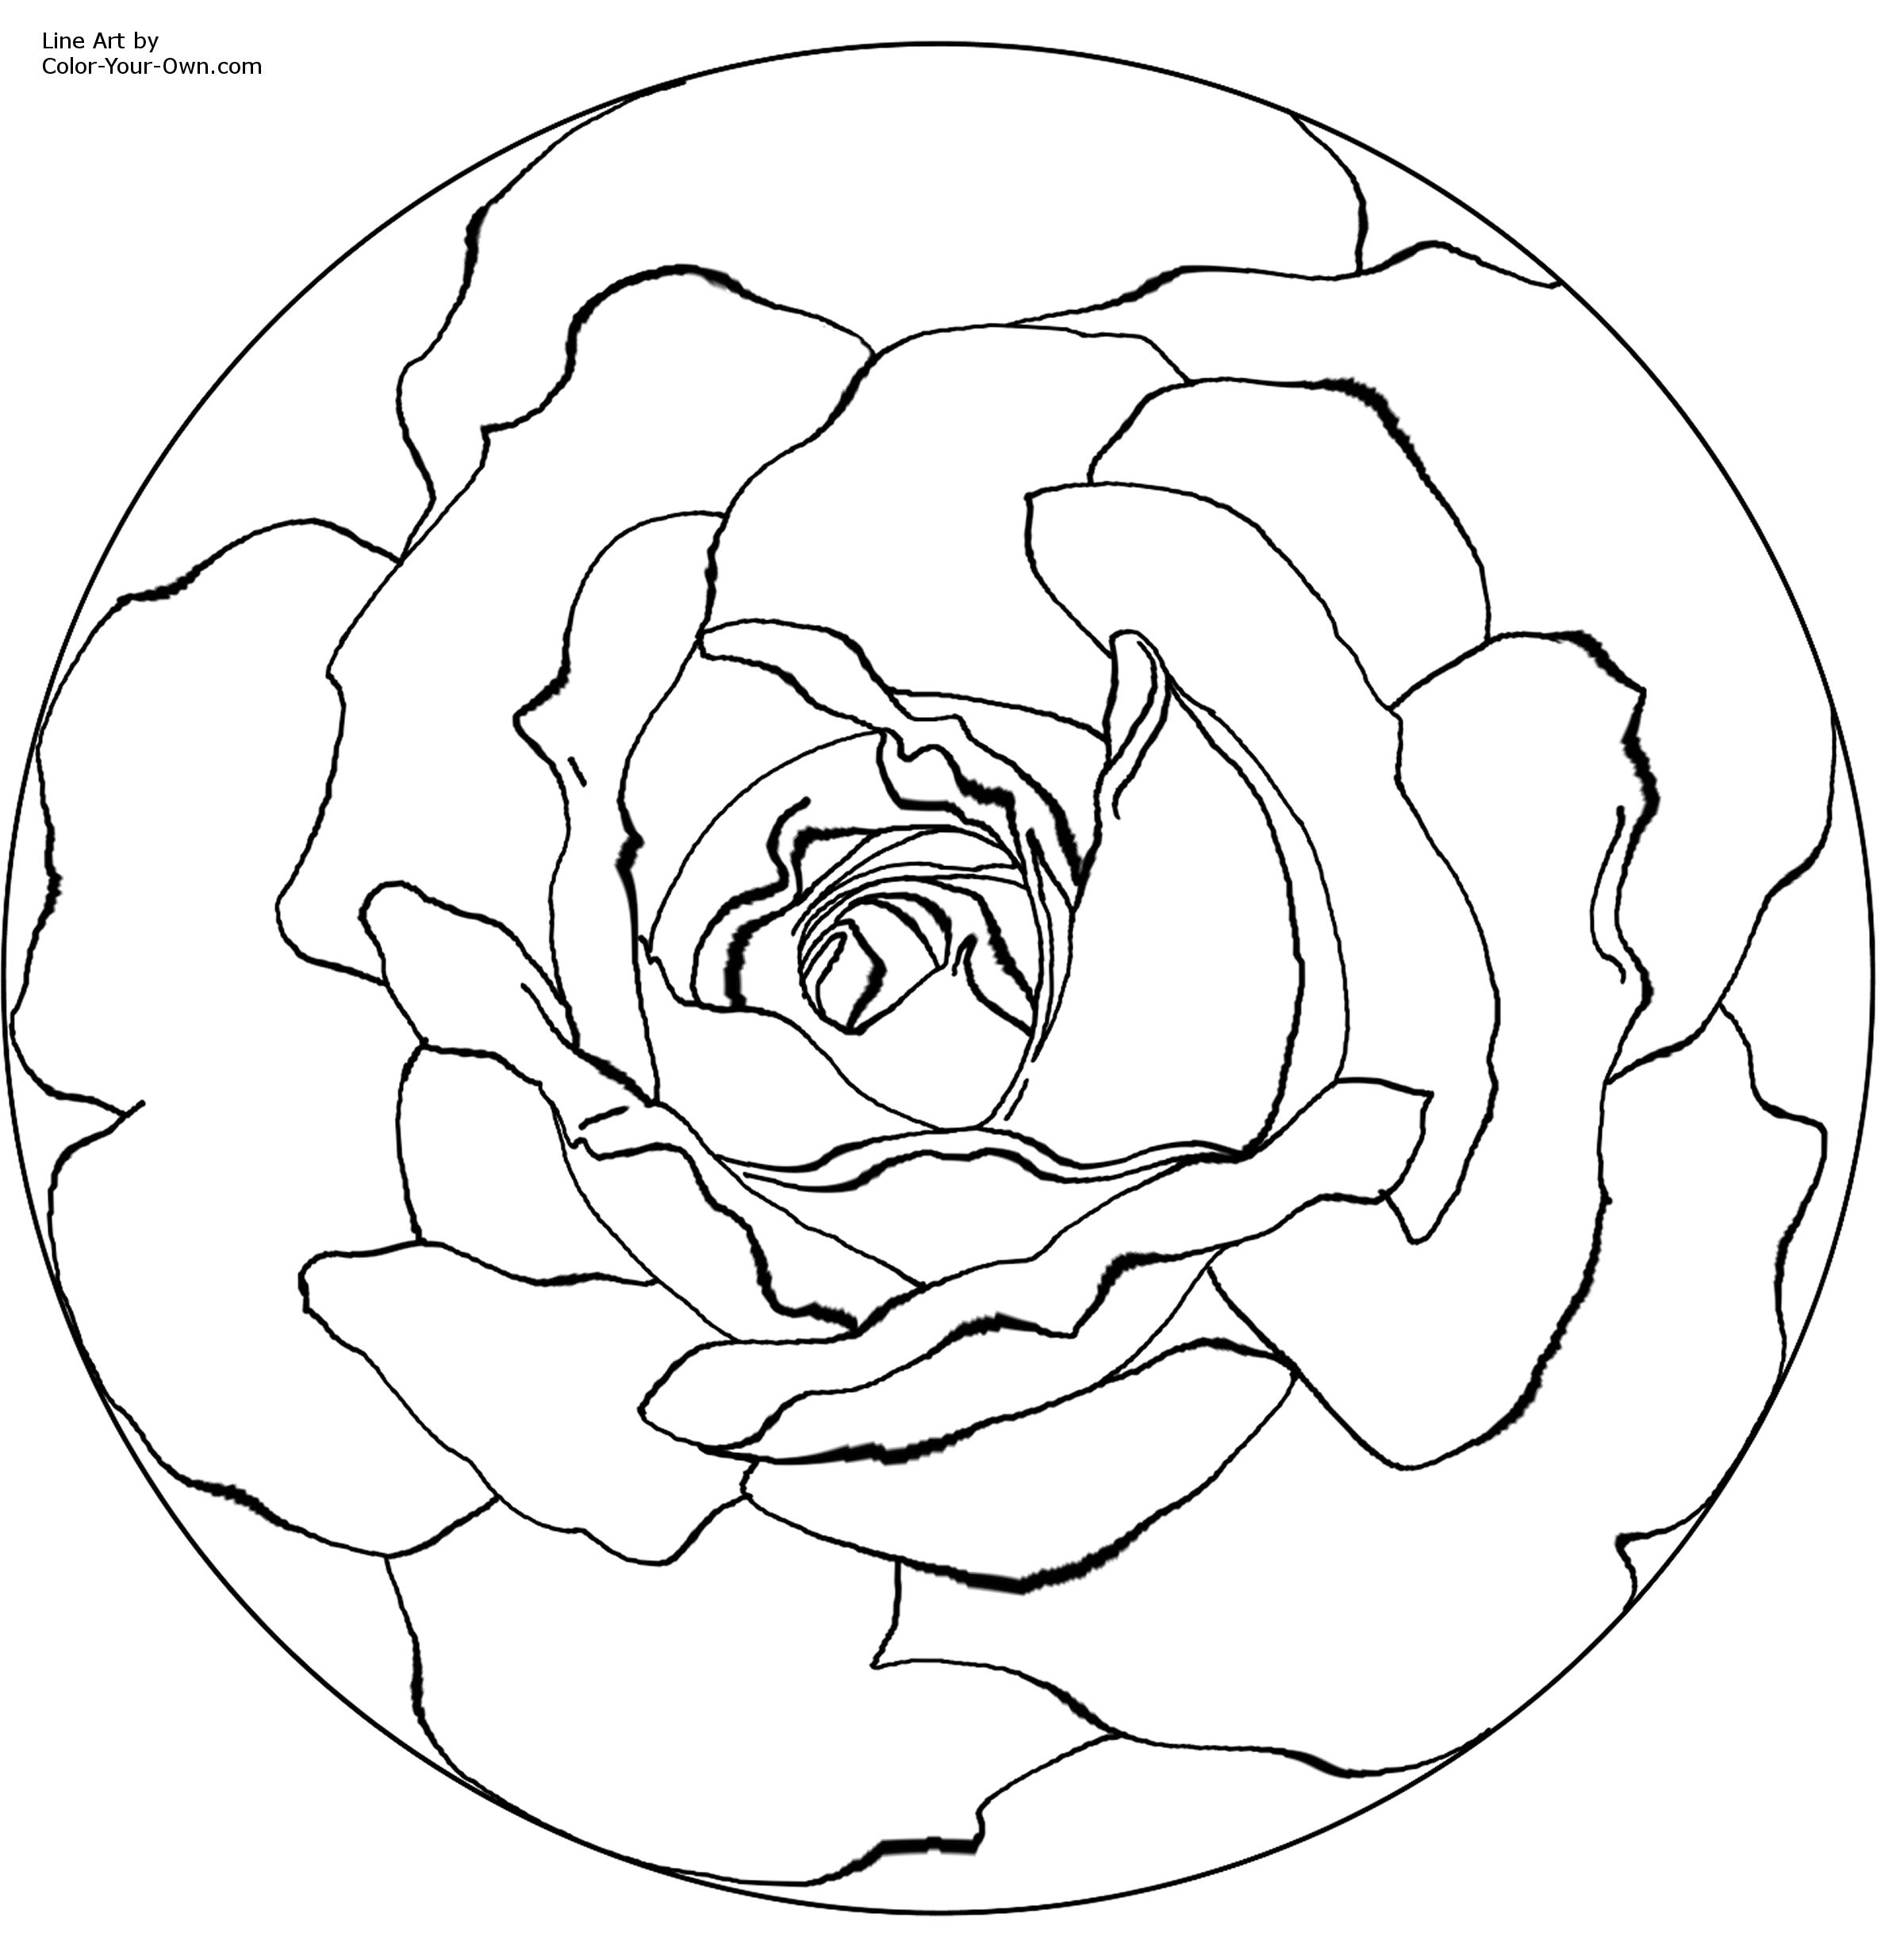  Mandala Coloring pages | FREE coloring pages | #63